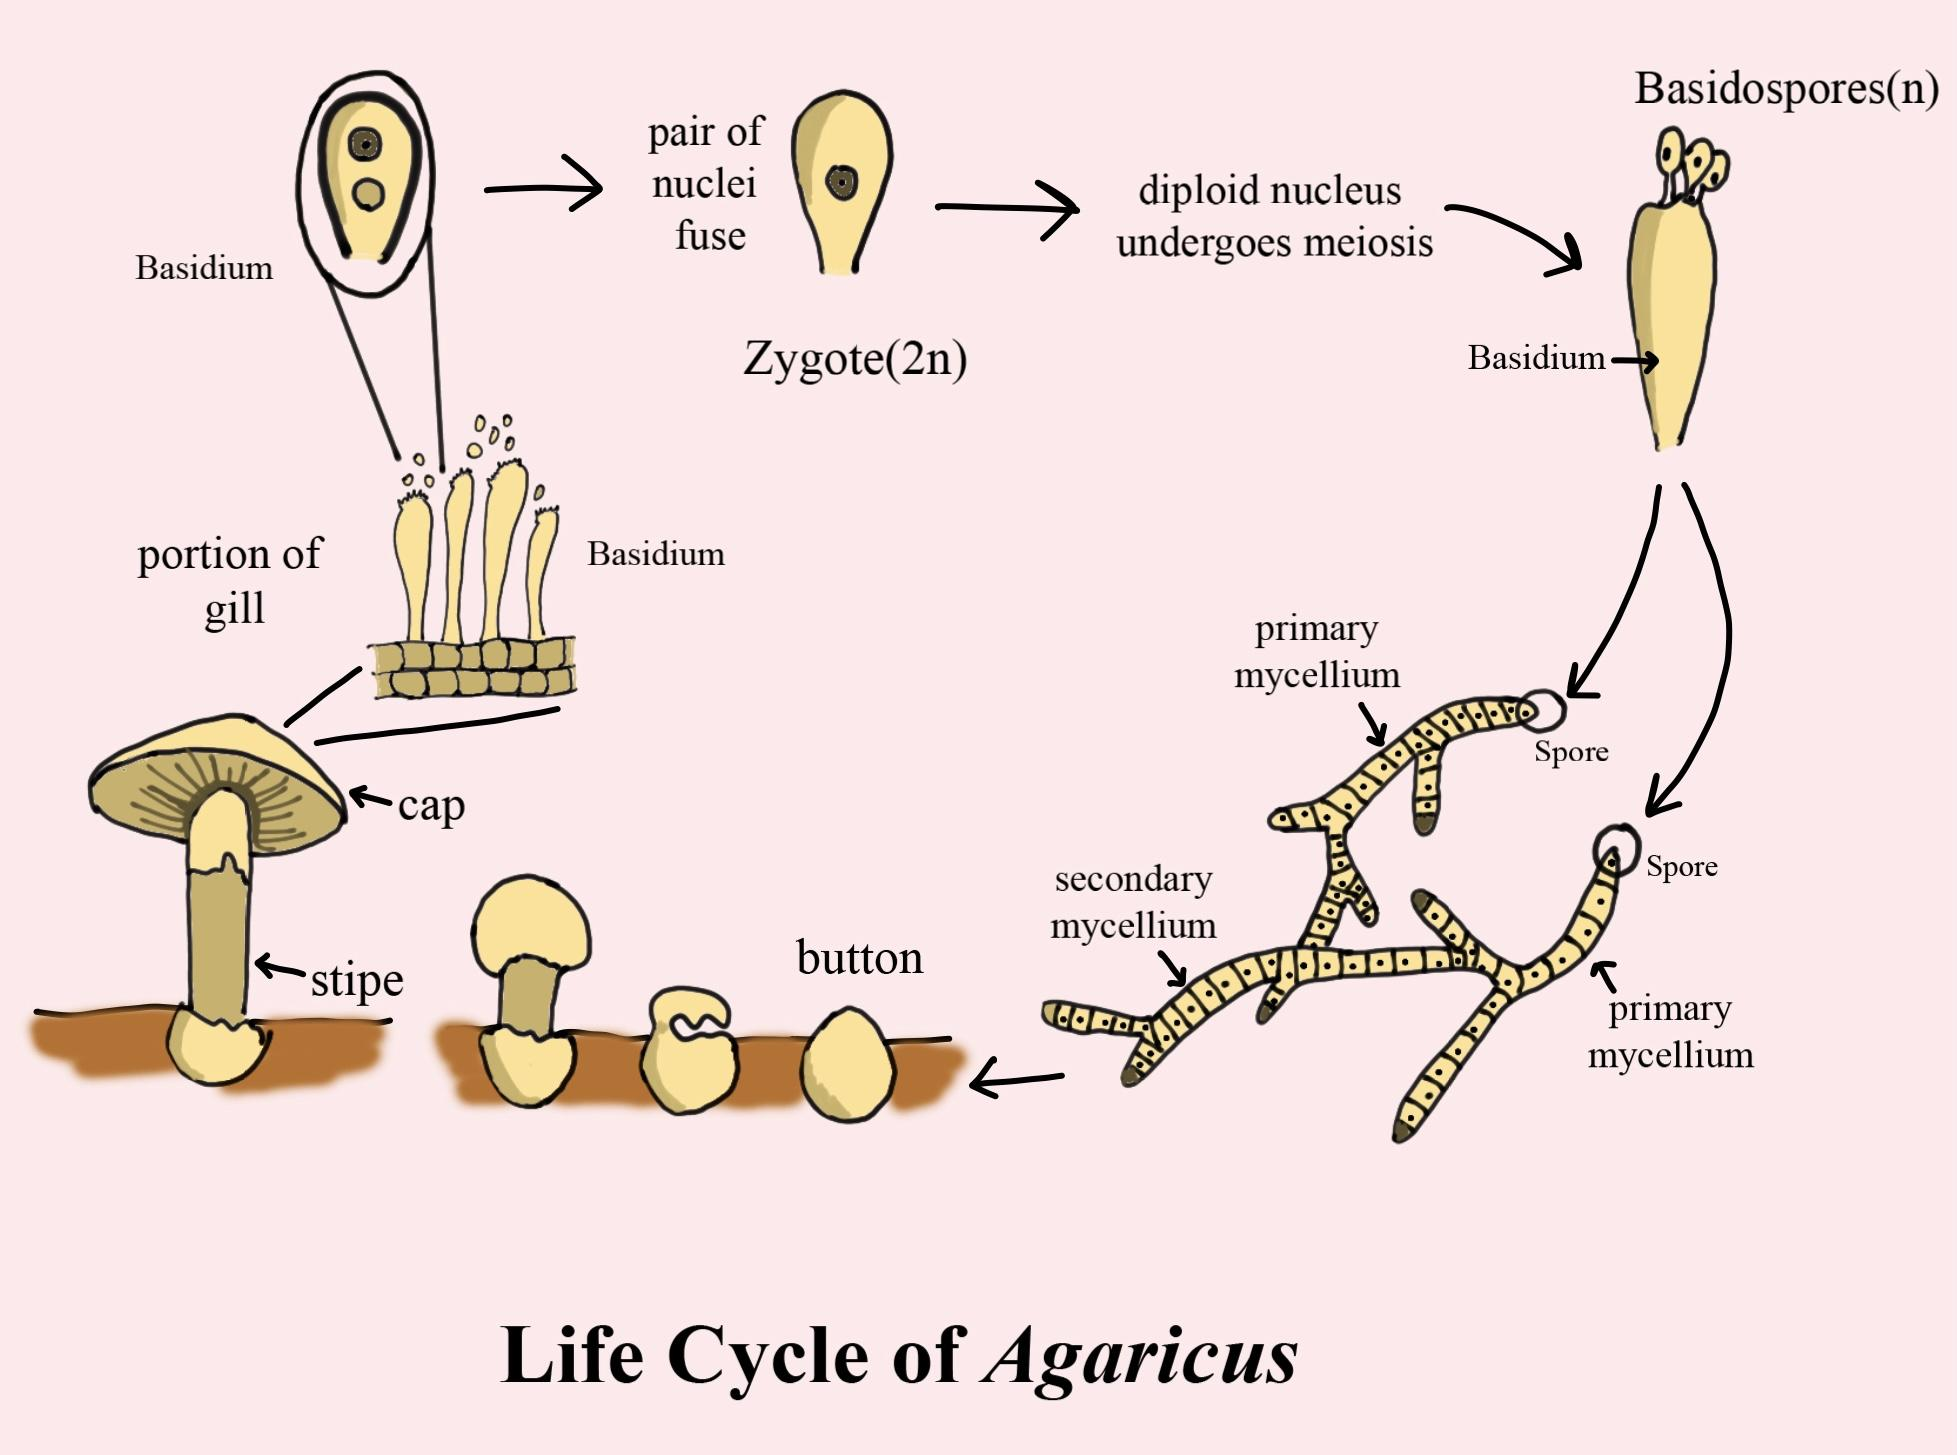 Life cycle of Agaricus